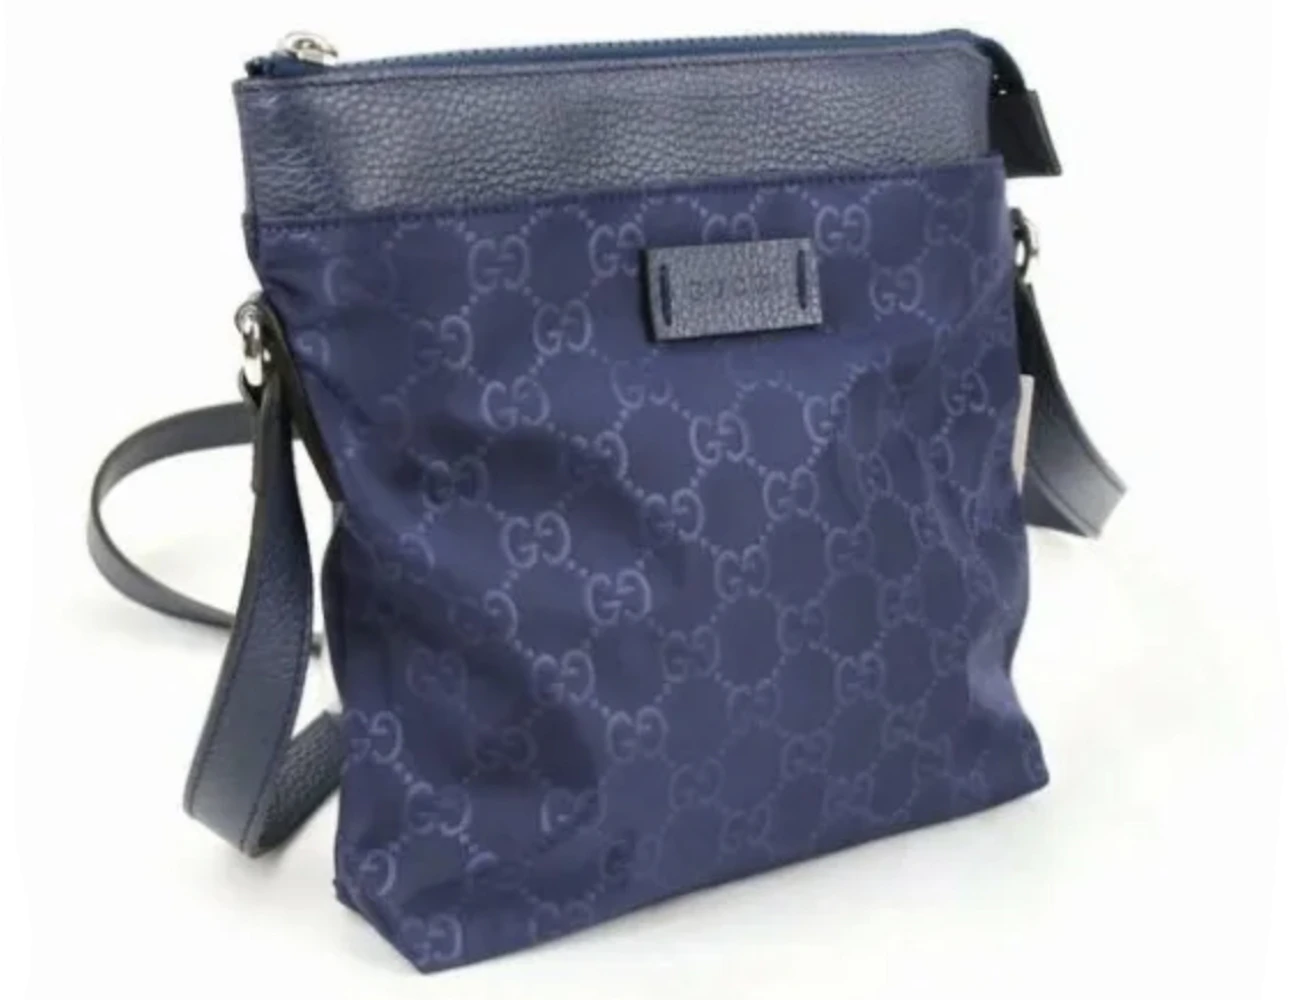 Gucci Messenger Bag GG Nylon Small Blue in Nylon/Leather with